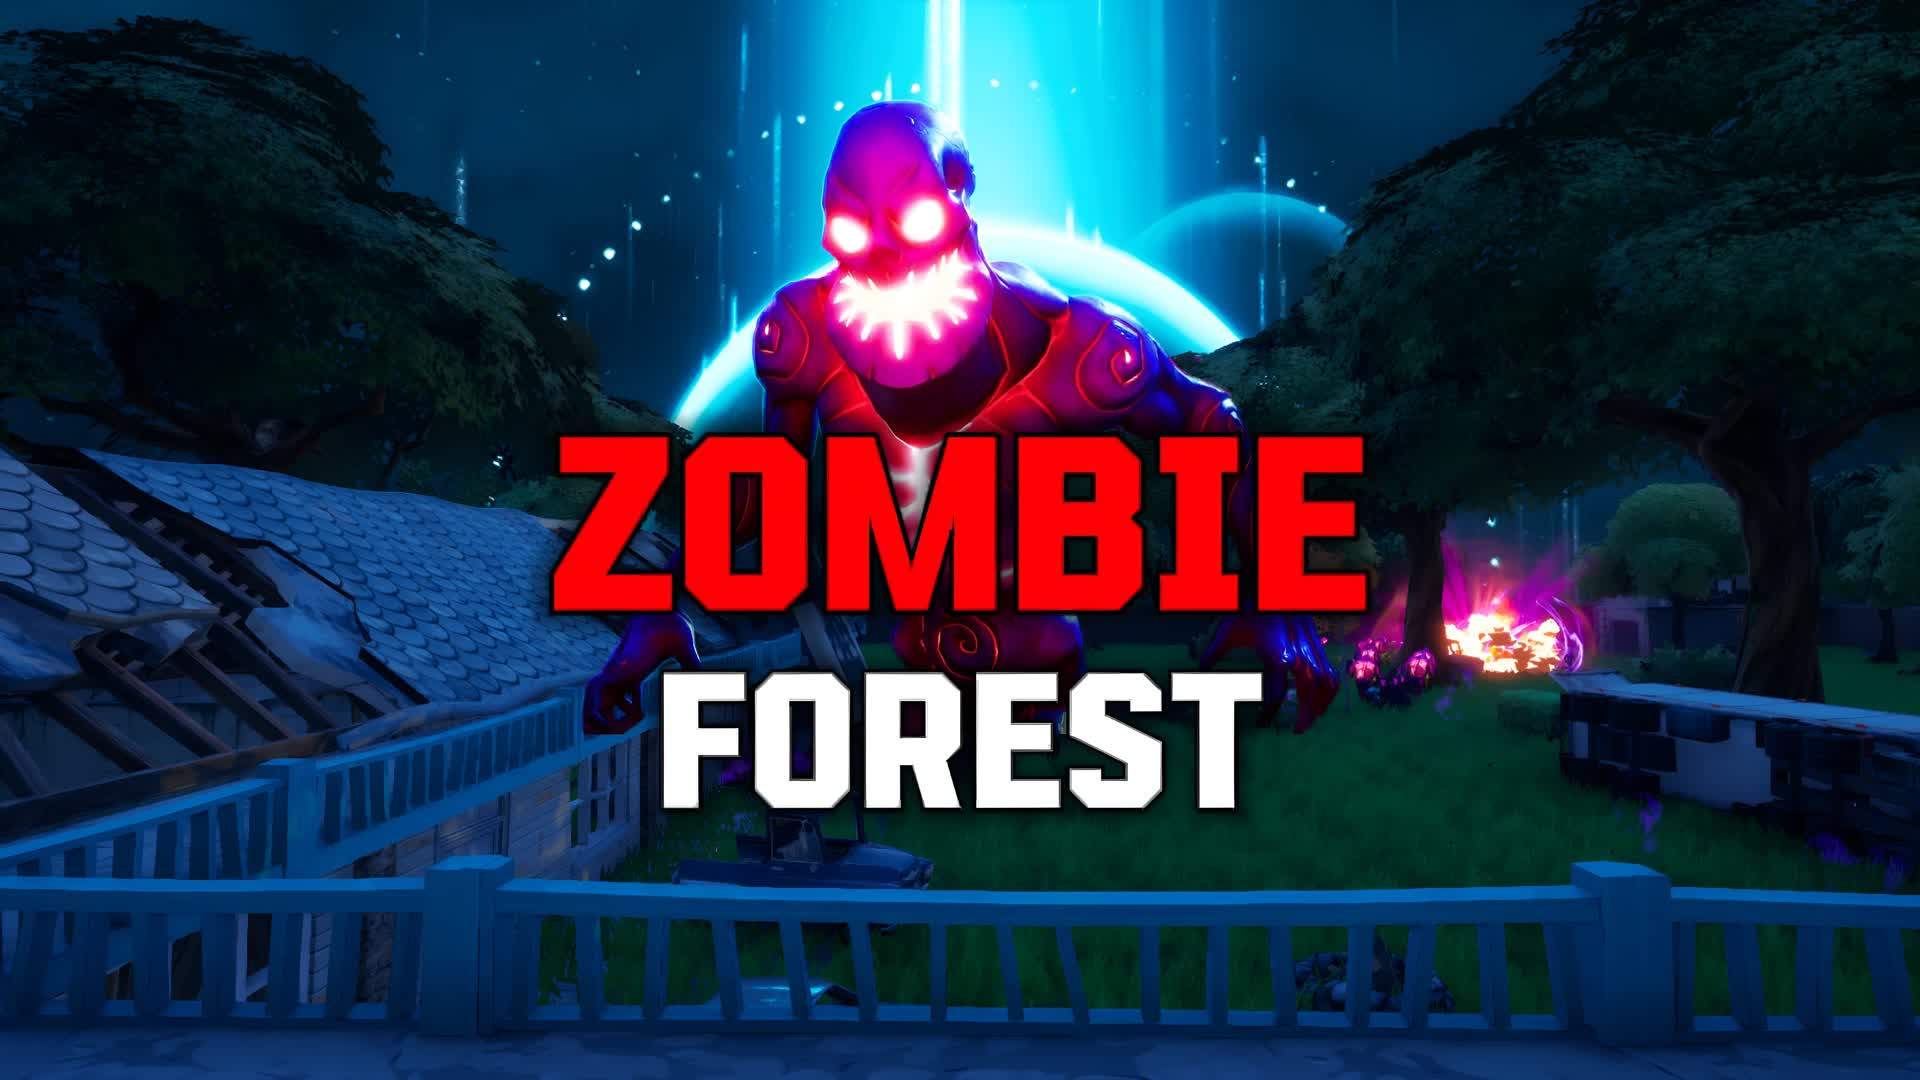 Zombie forest